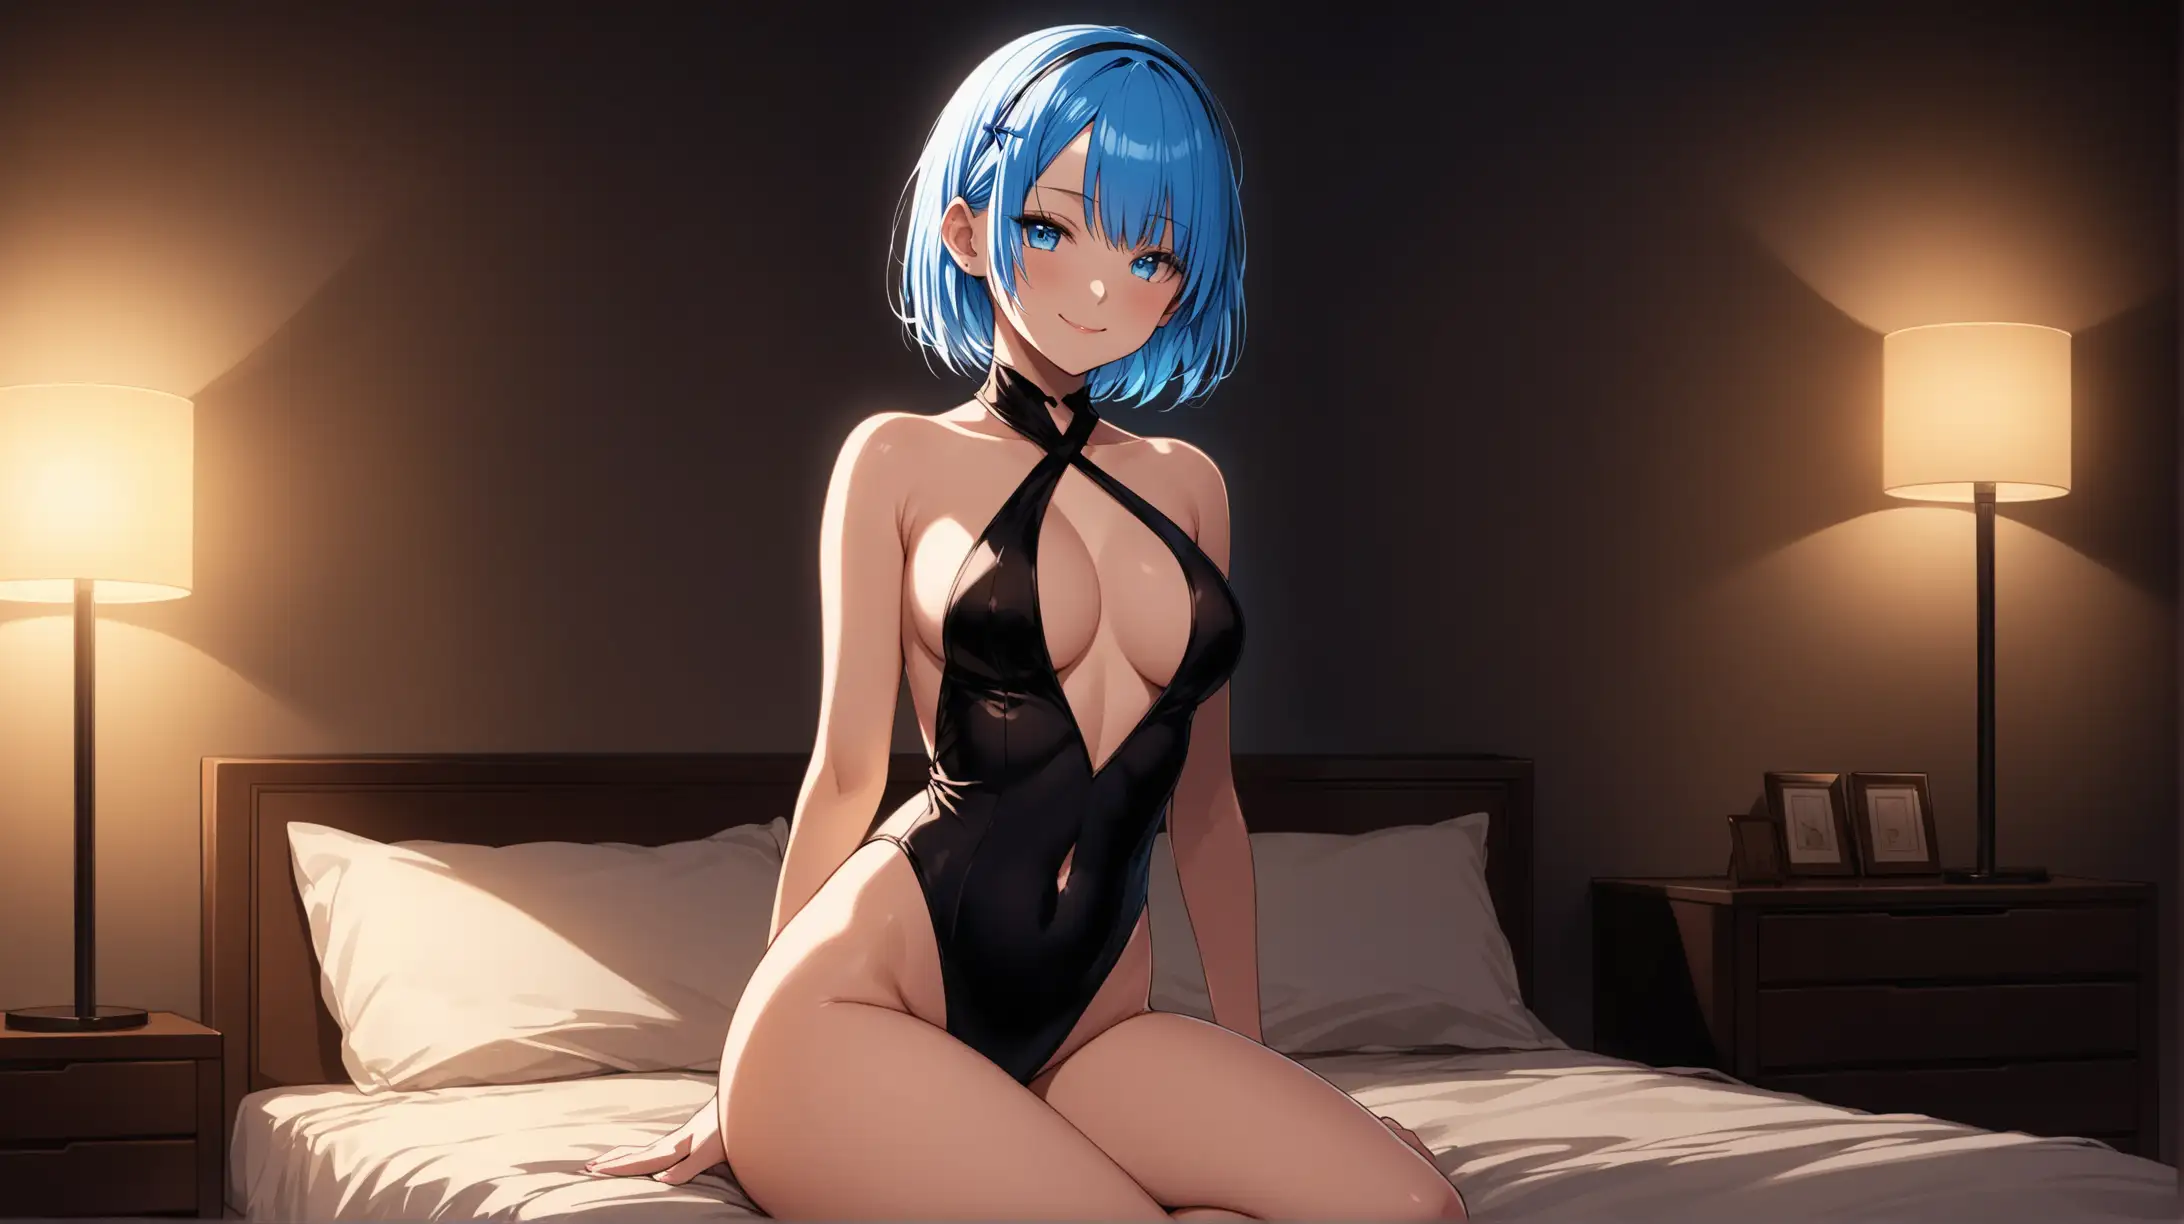 Draw the character Rem, high quality, dim lighting, long shot, indoors, bedroom, nighttime, seductive pose, revealing outfit, smiling at the viewer